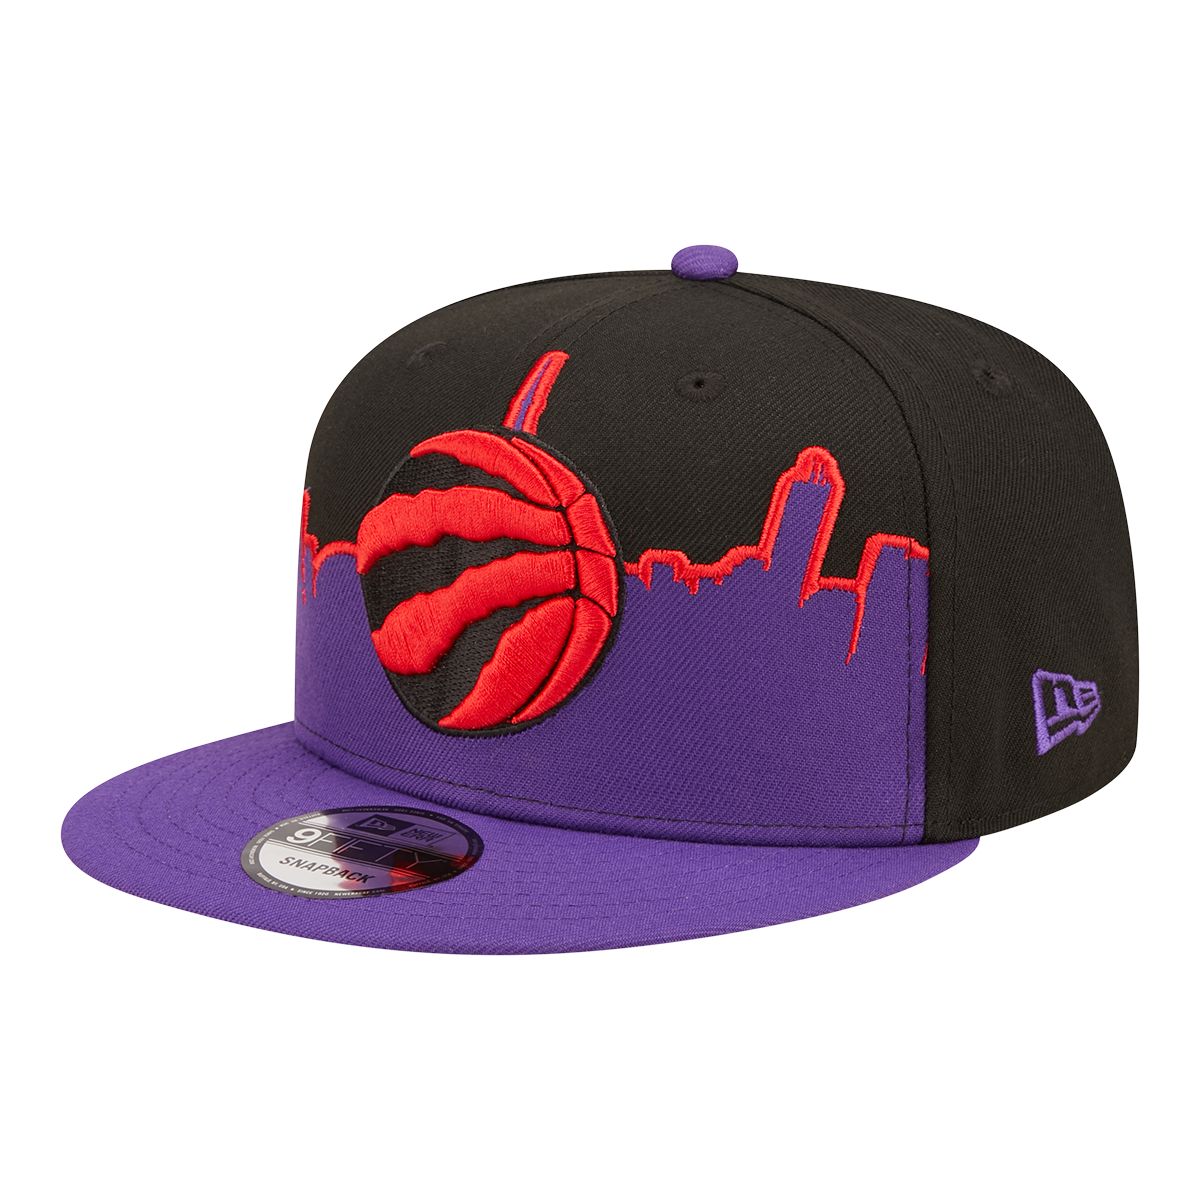 Tri Cycle Fitted Hat Toronto Raptors